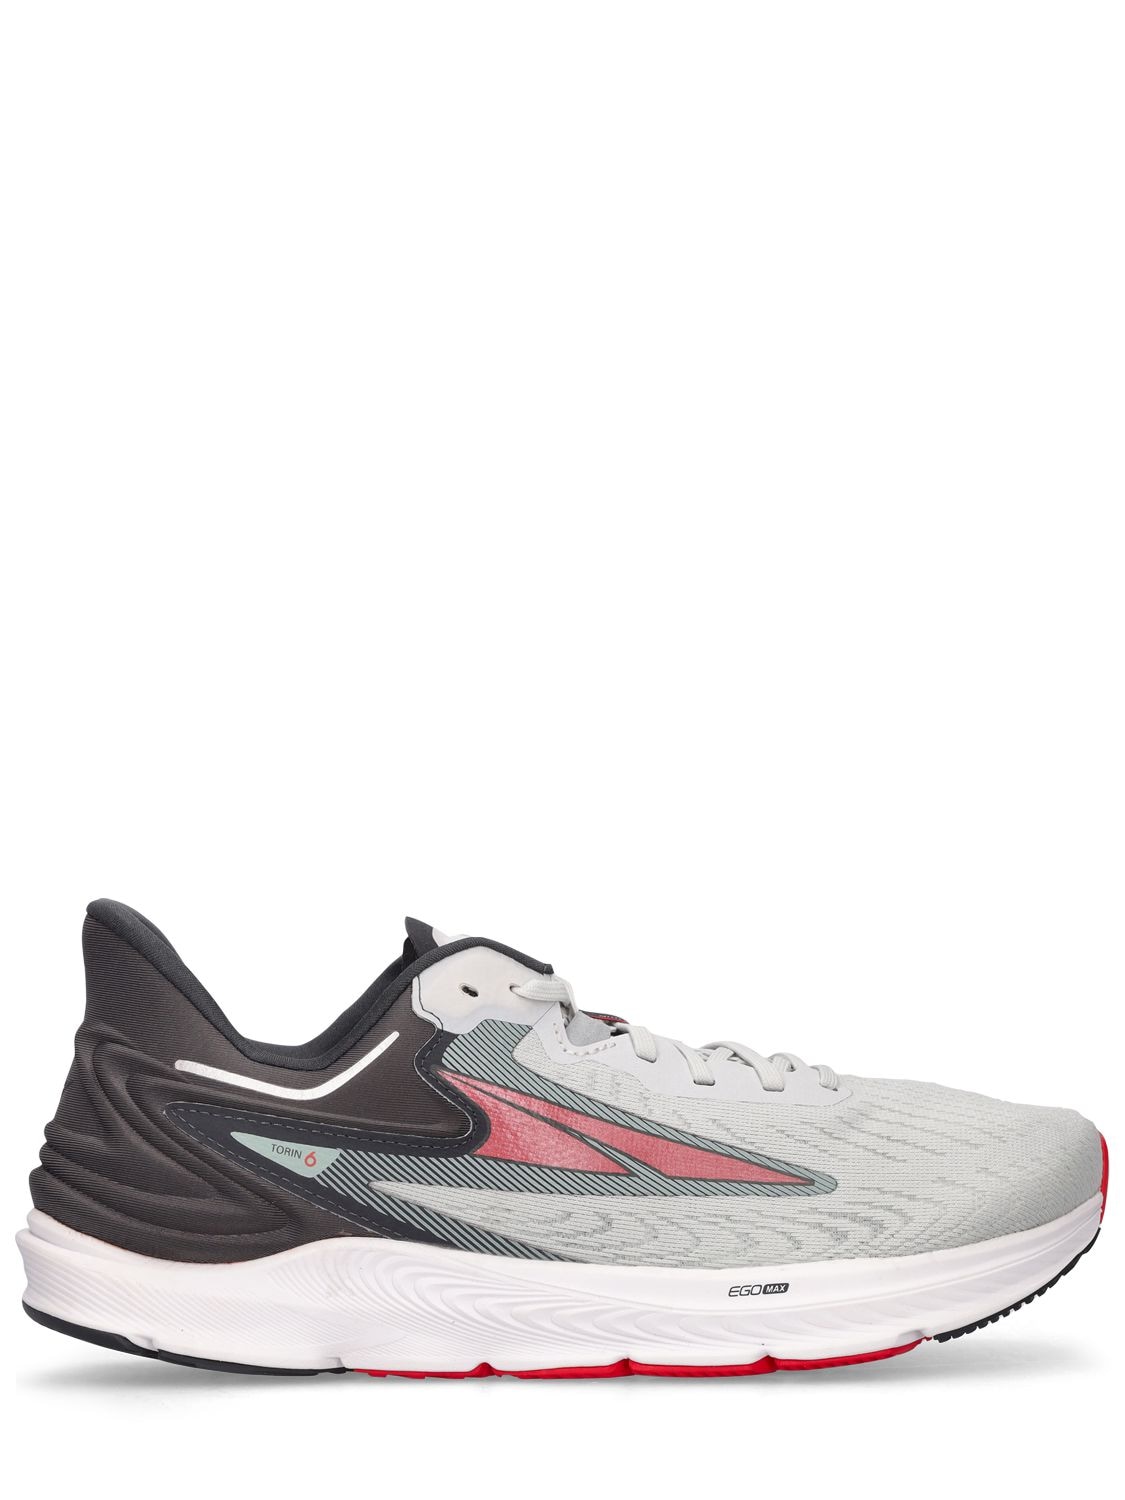 Altra Running Torin 6 Road Running Sneakers In Grey,red